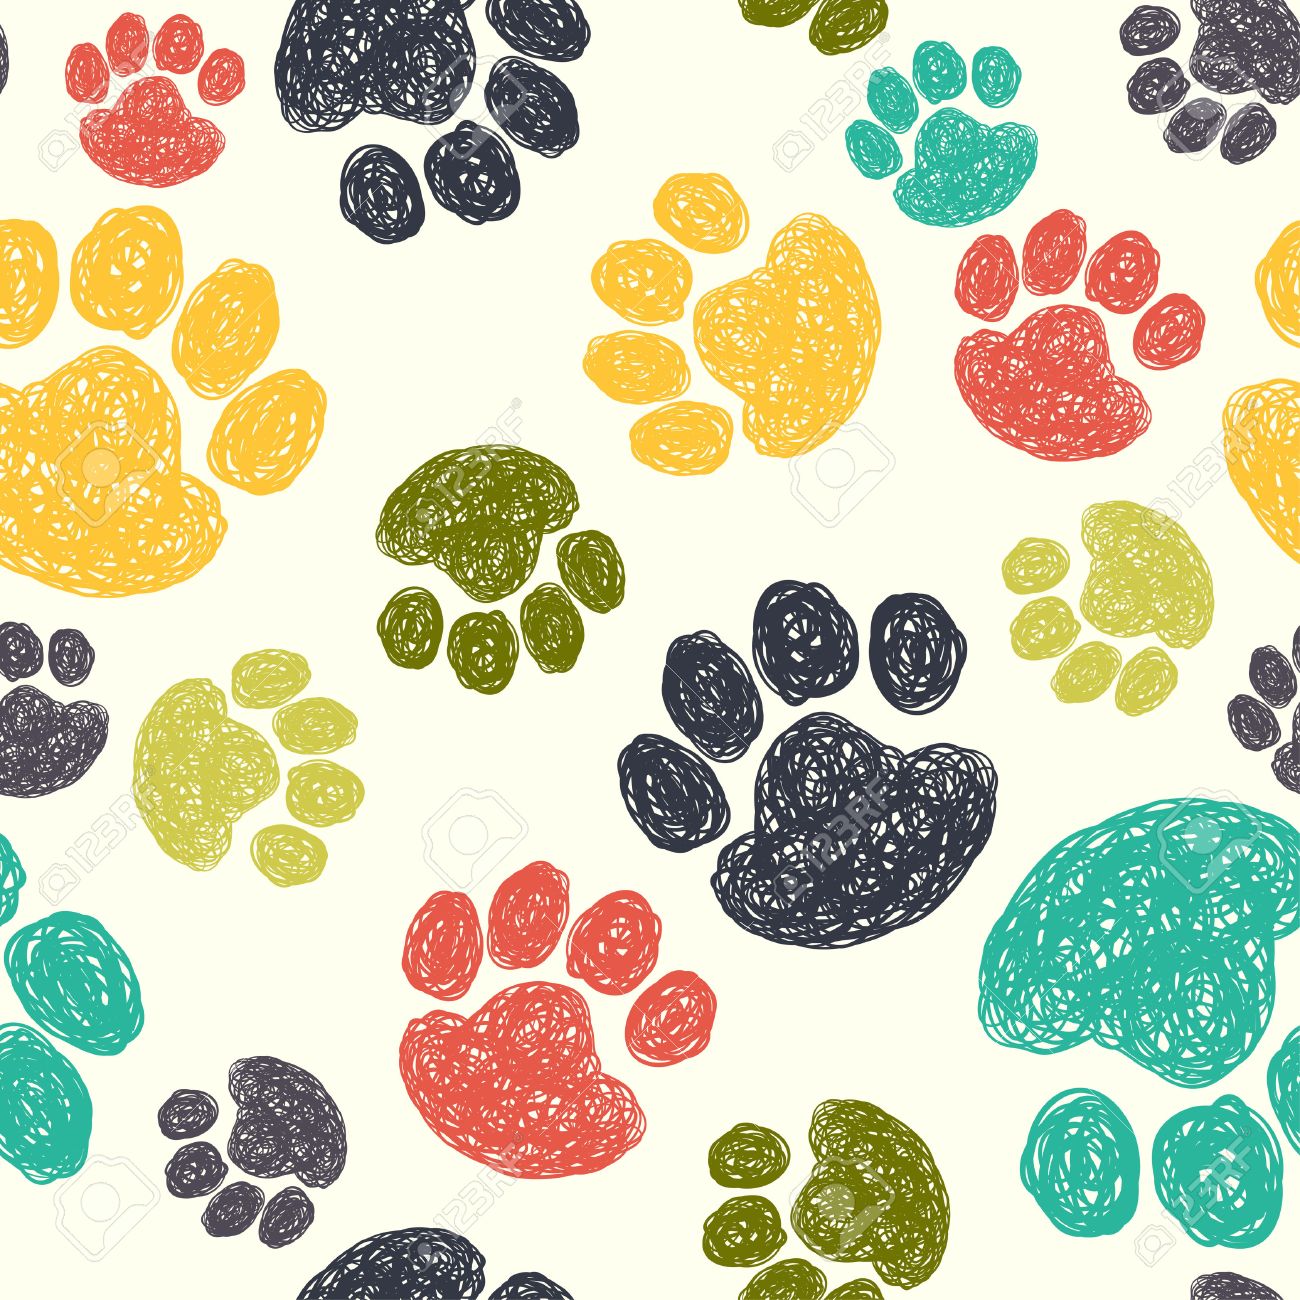 Cute Seamless Pattern With Colorful Hand Drawn Doodle Paw Prints